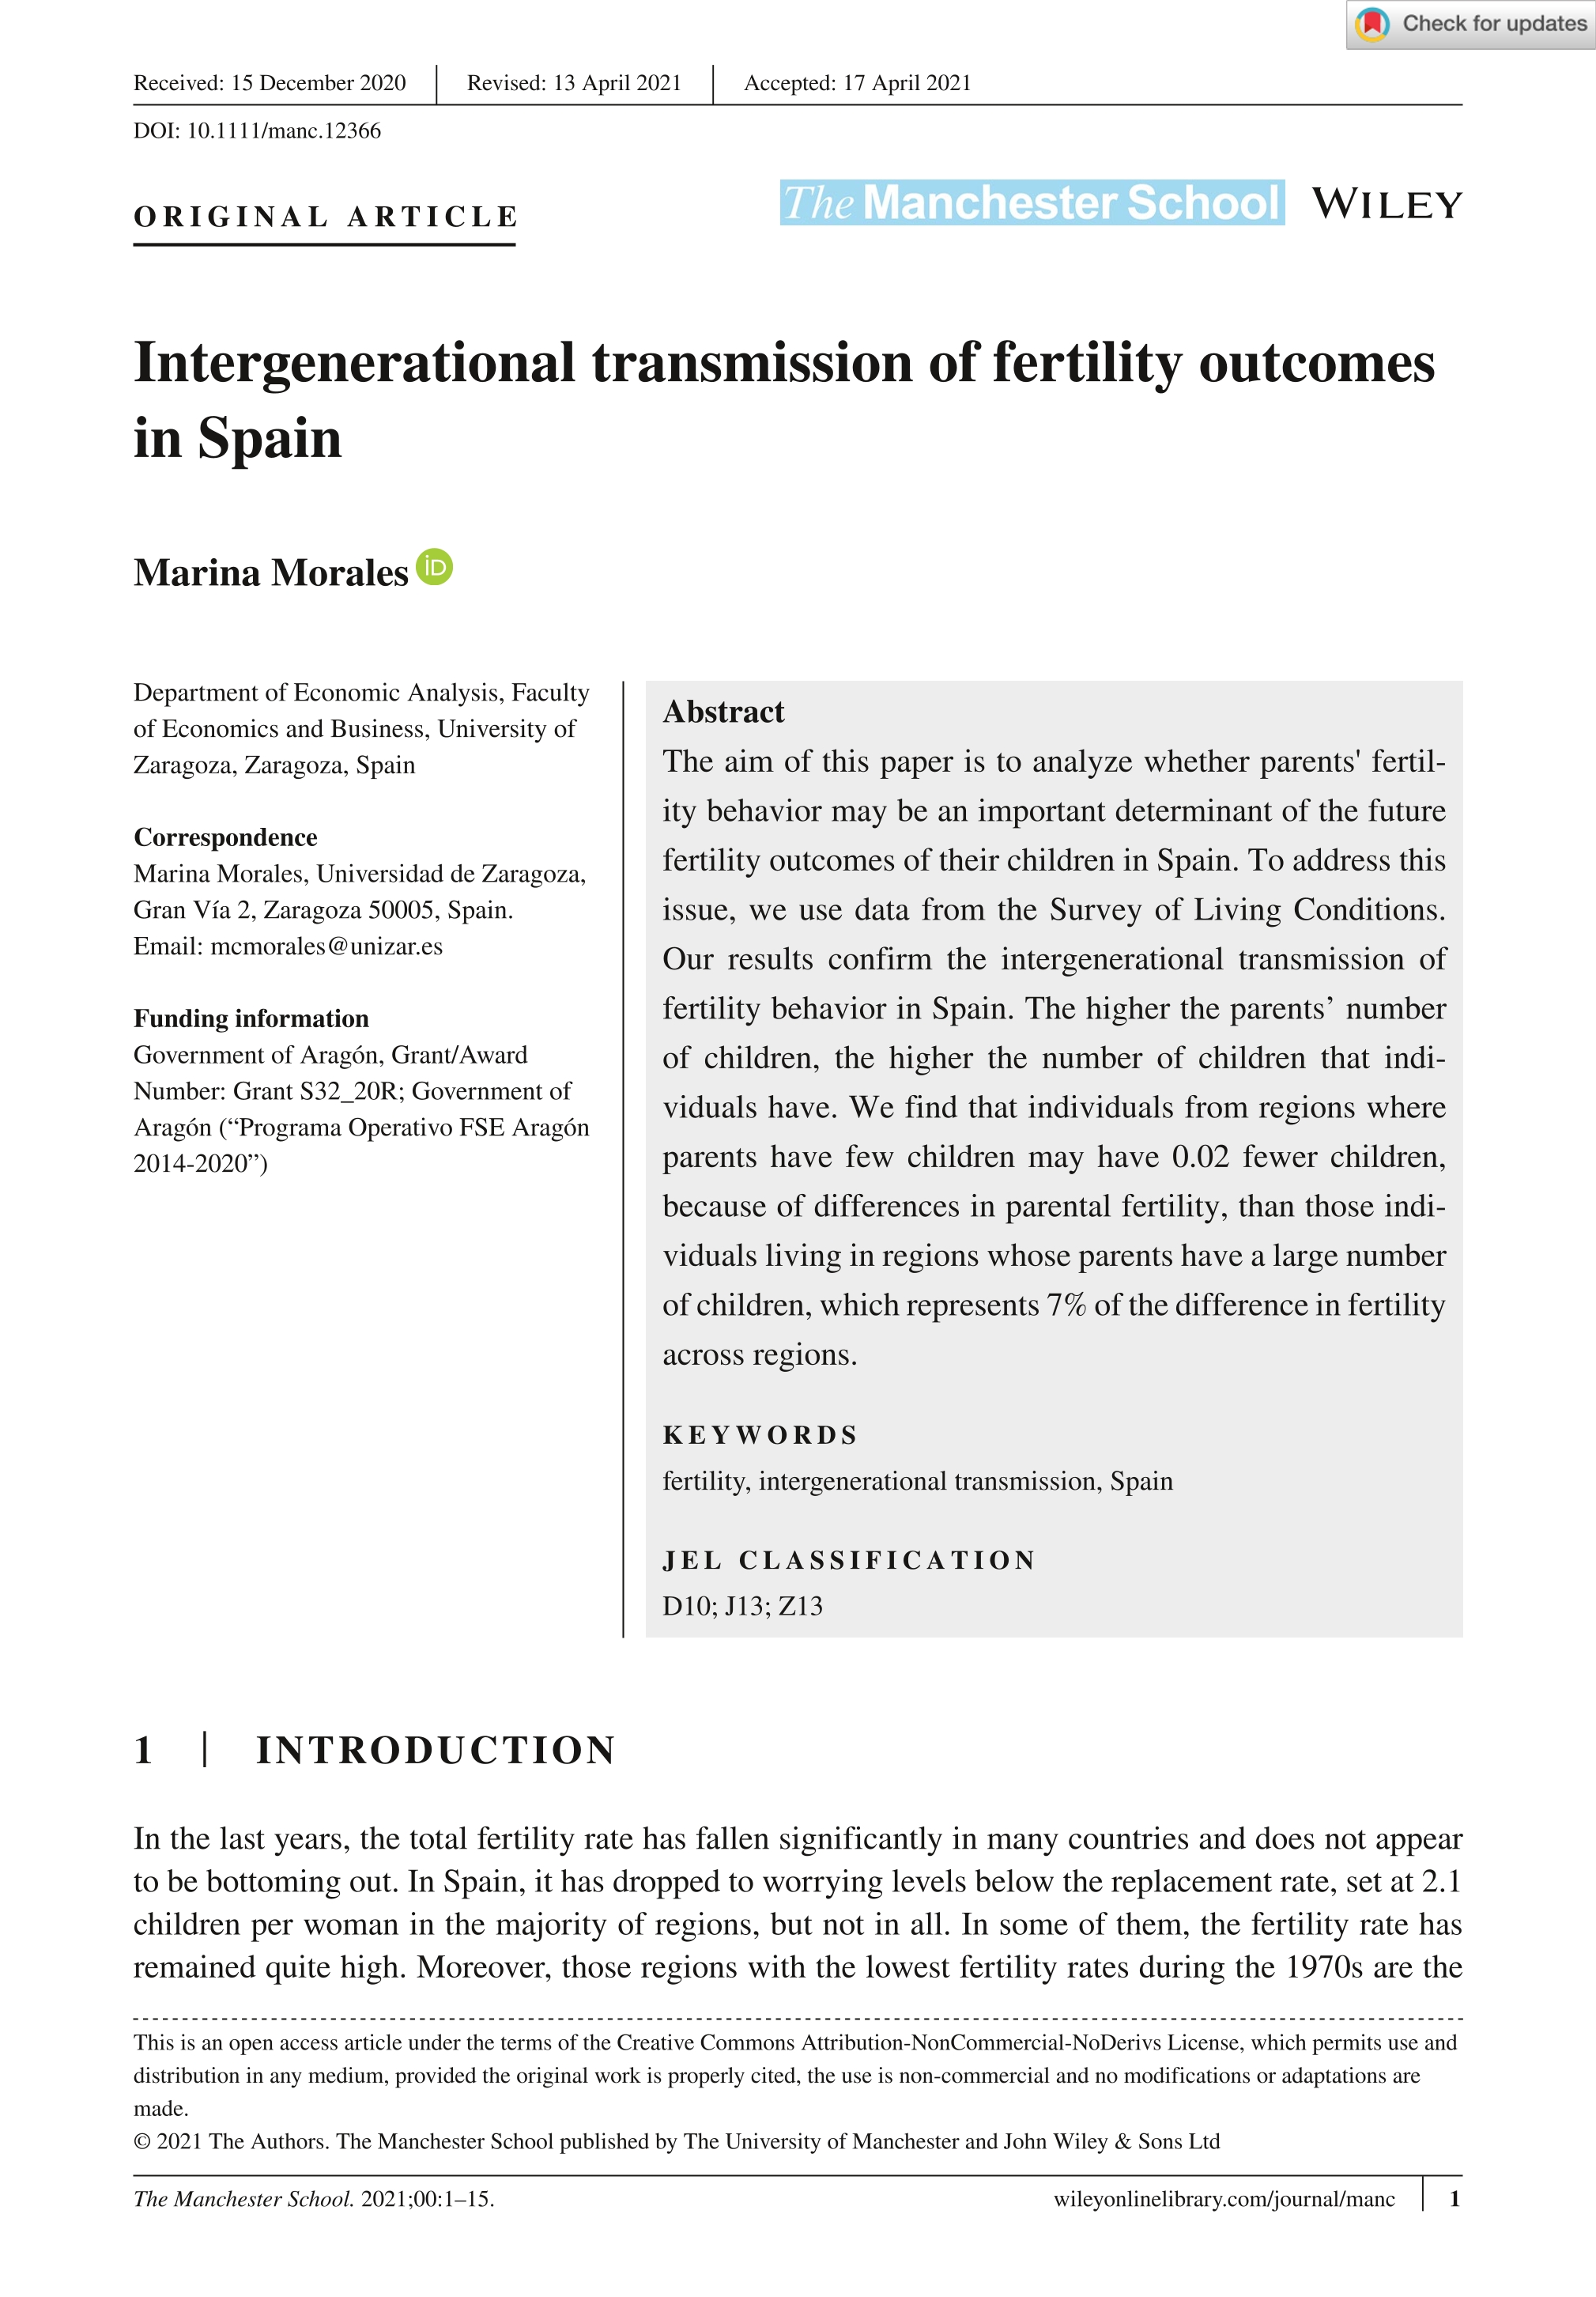 Intergenerational transmission of fertility outcomes in Spain